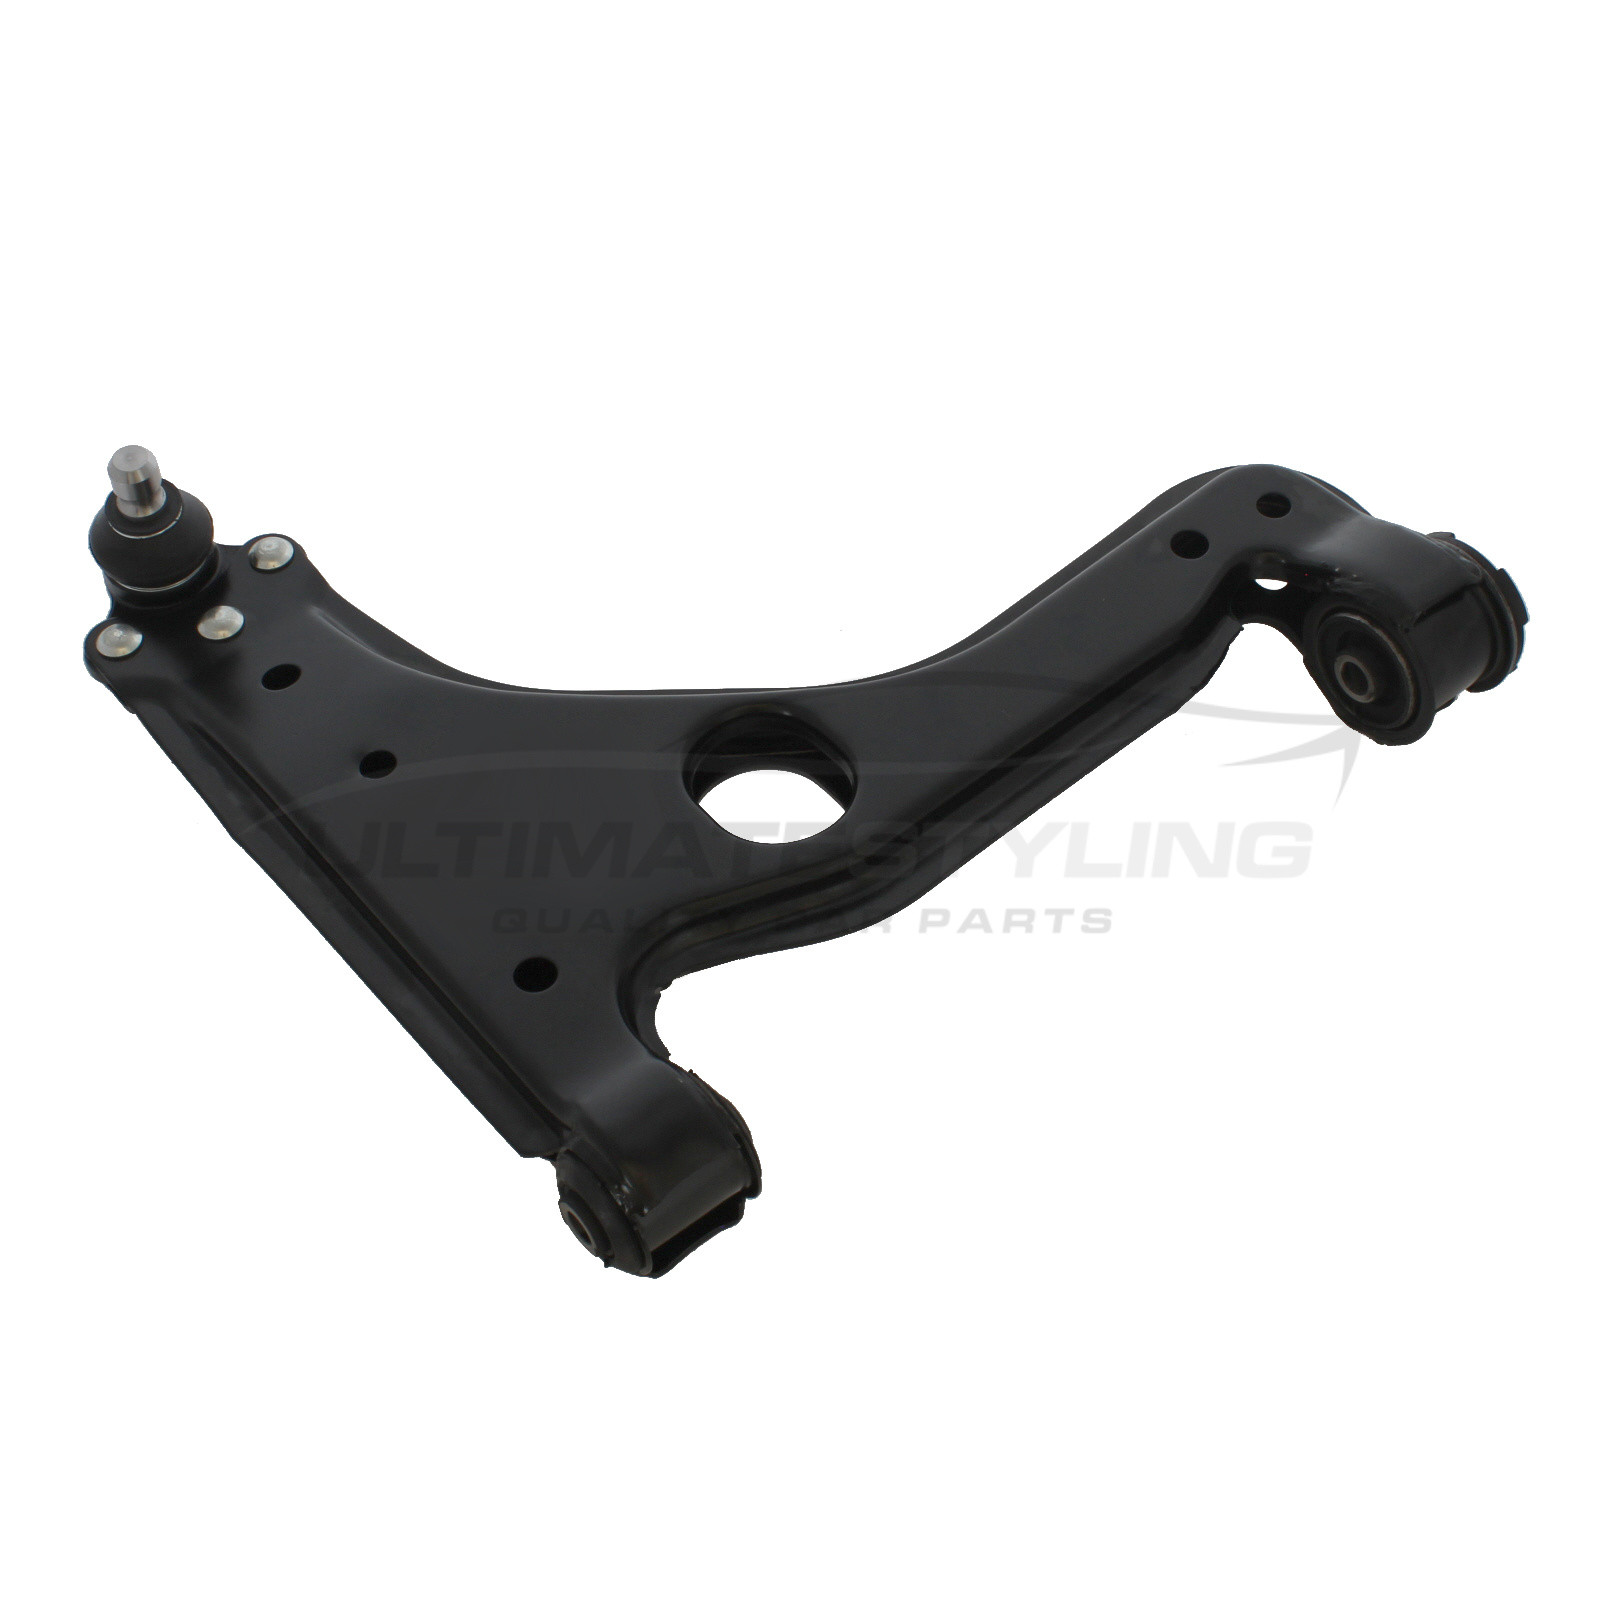 Suspension Arm for Vauxhall Astra